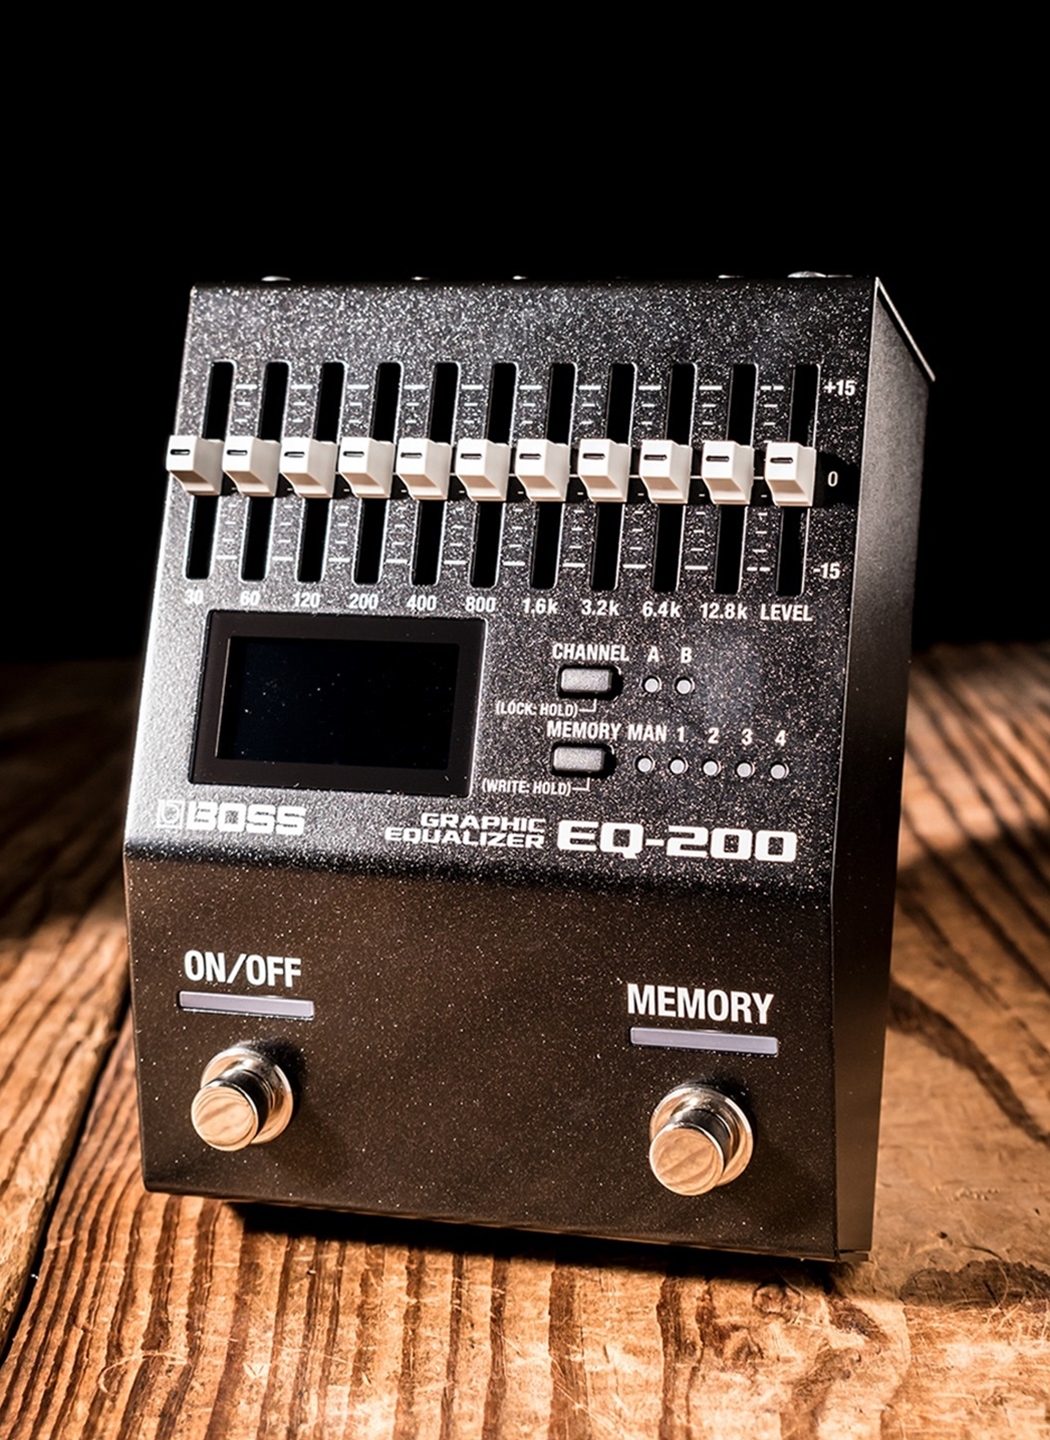 BOSS EQ-200 Graphic Equalizer Pedal